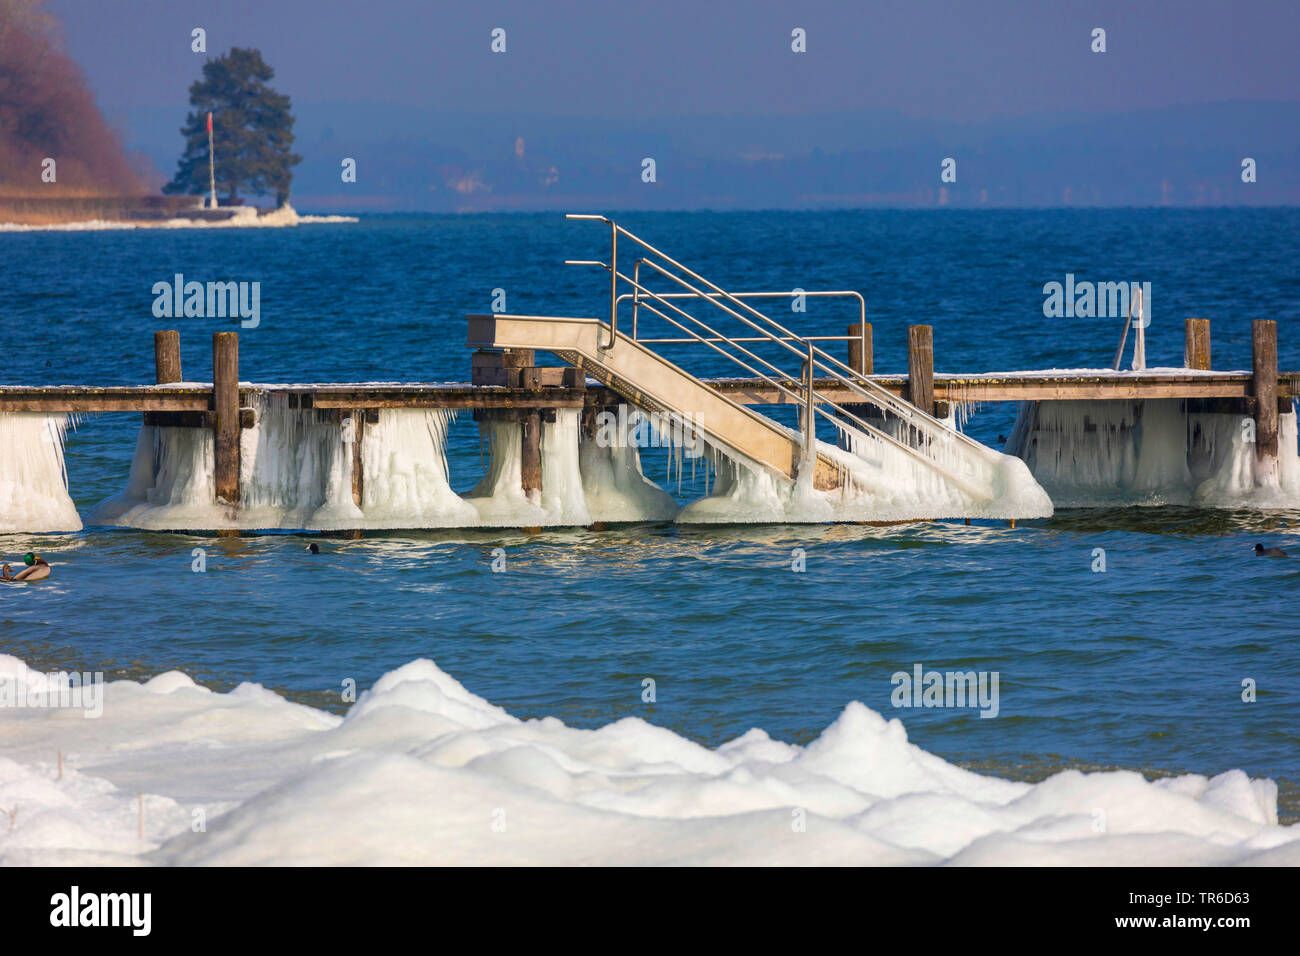 weirdly shaped icing on a bathing jetty after winter storm, Germany, Bavaria, Lake Chiemsee Stock Photo